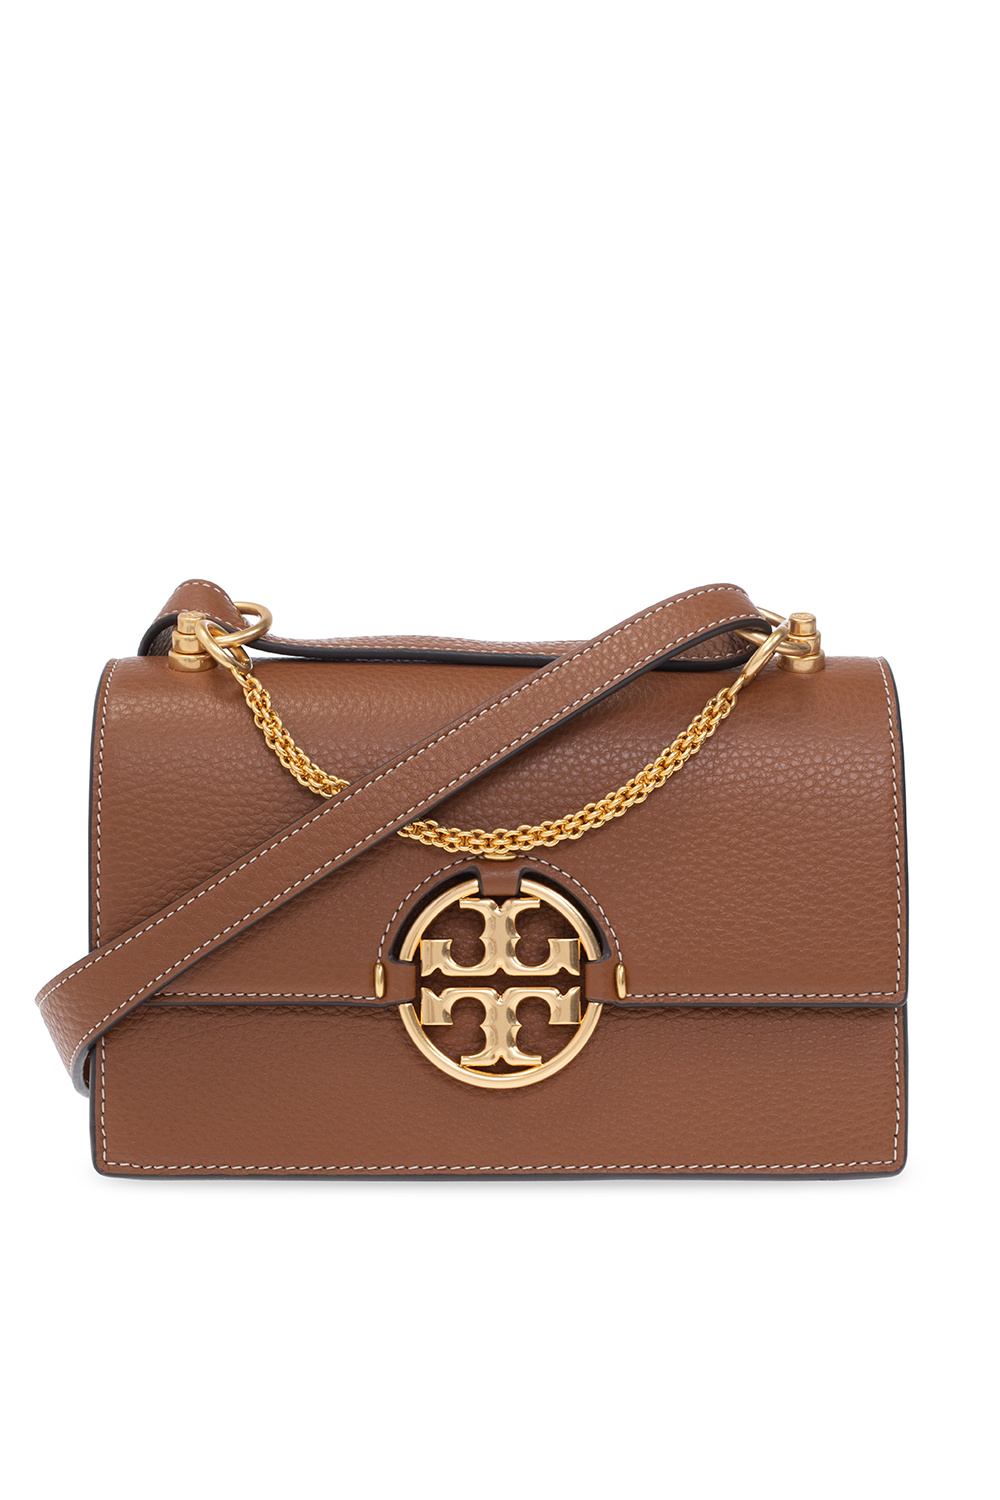 Women's Bags TOMMY | Tory Burch 'Miller Small' shoulder bag | IetpShops |  studs and pouches to personalise your bag